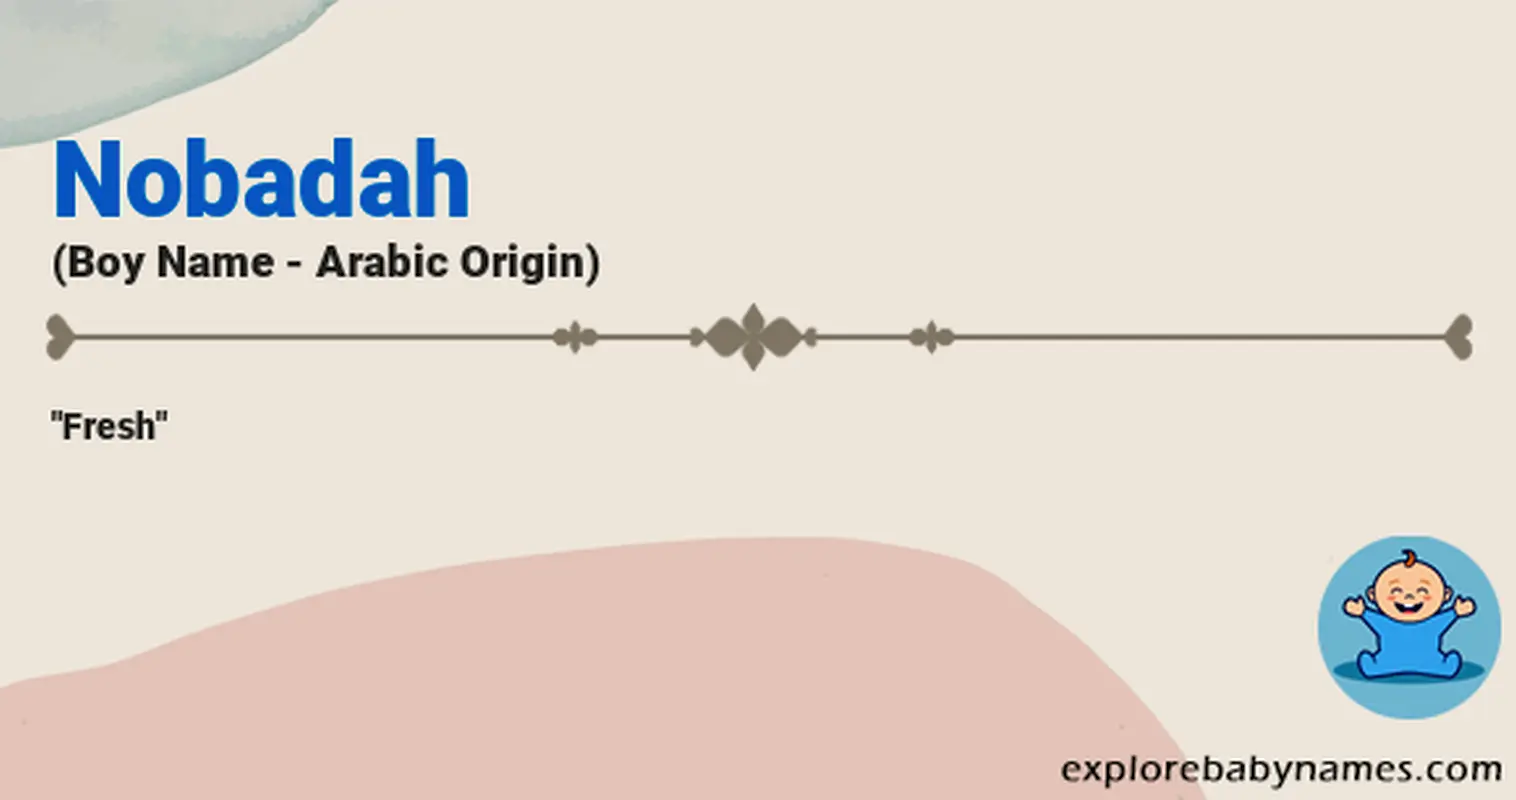 Meaning of Nobadah